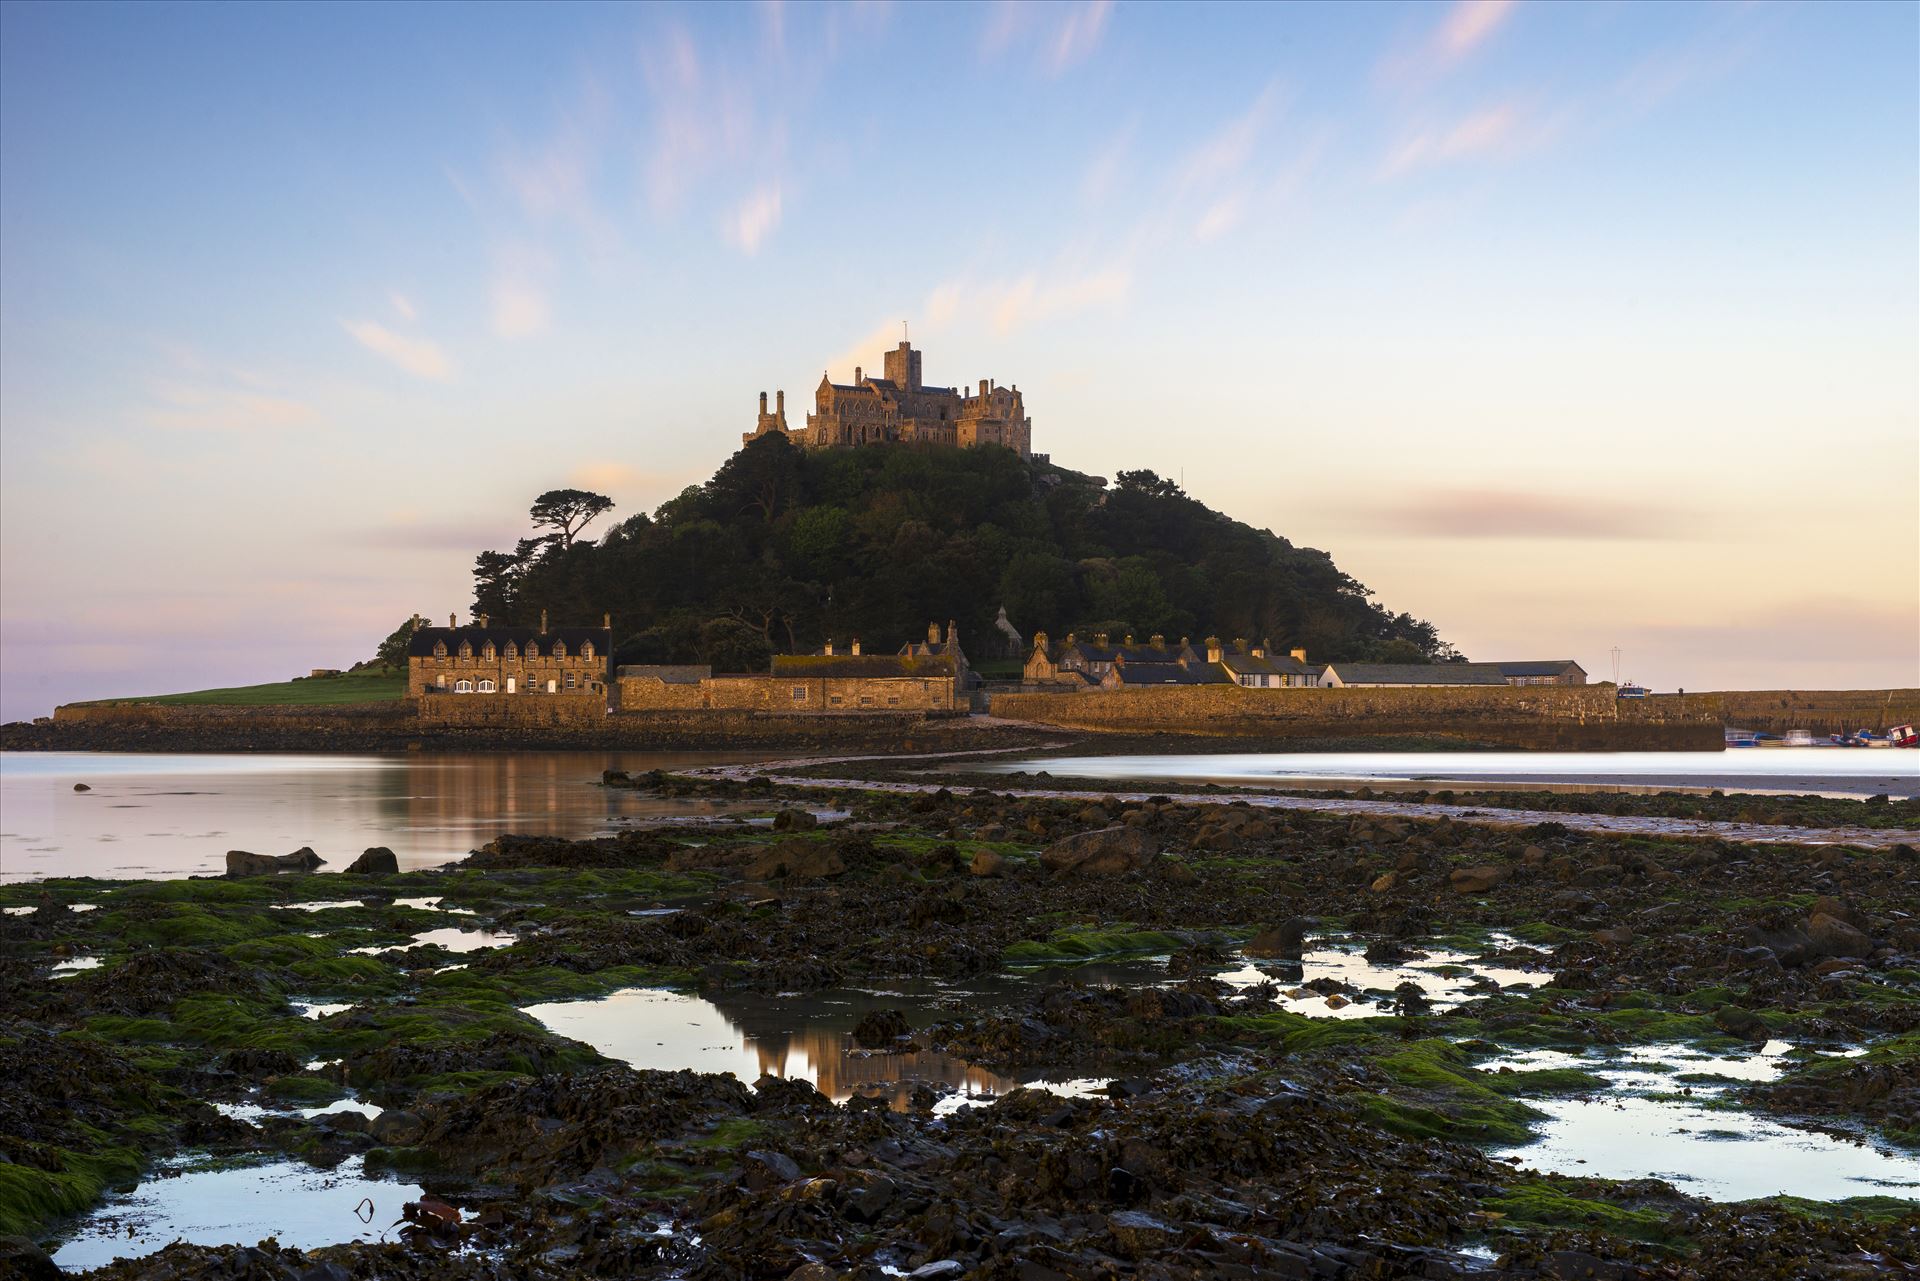 St. Michael's Reflection I decided to experiment with a different position to photograph St. Michael's Mount, by venturing onto the rocks. I was looking for any reflections to add some symmetry to my landscape. by James Etchells Photography